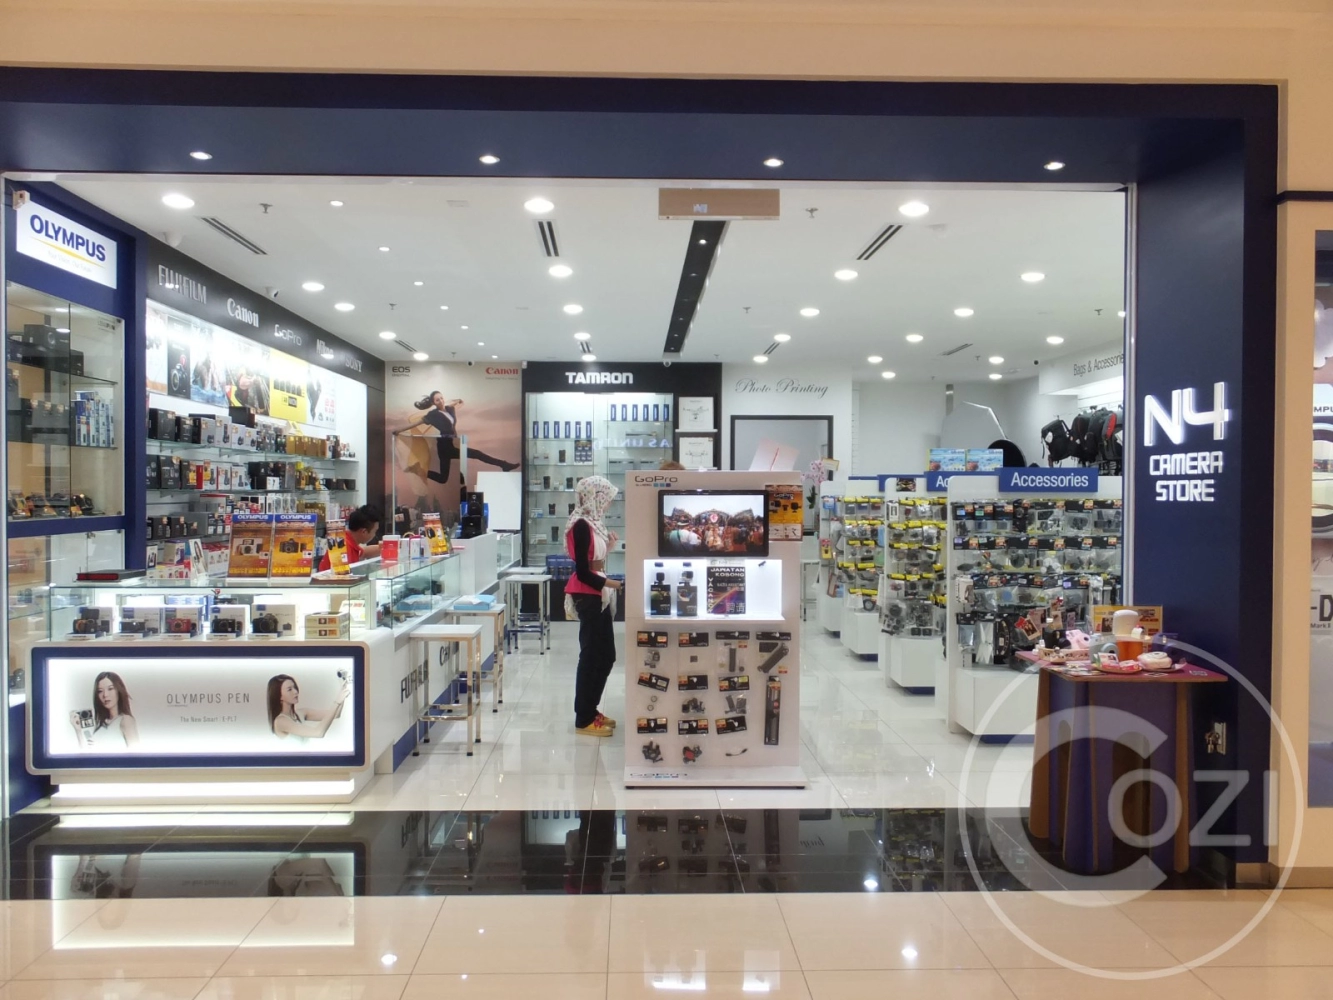 N4 Camera Store,Aman Central